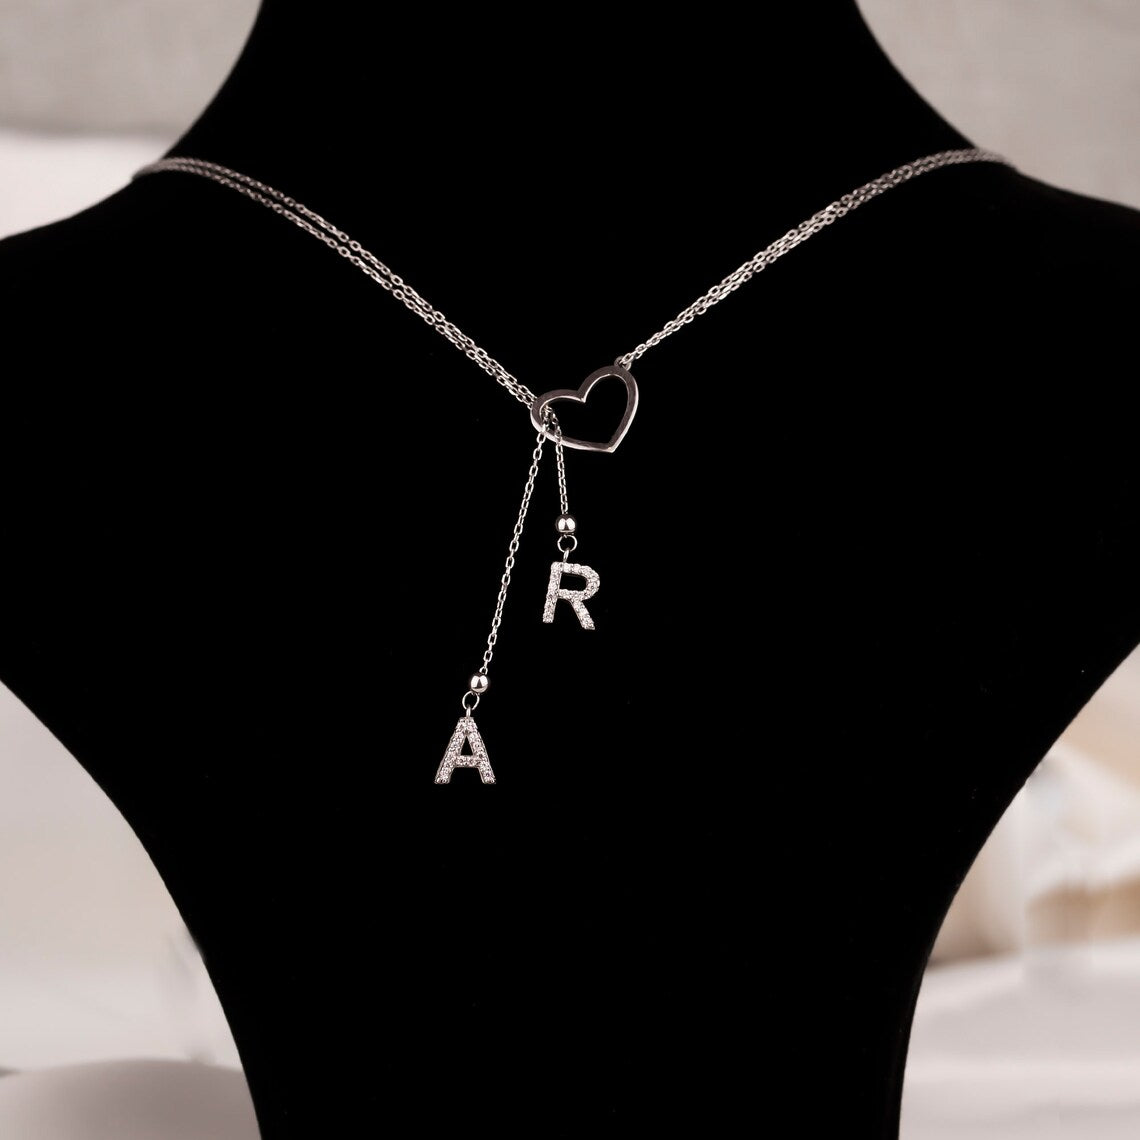 Personalized heart-shaped letter necklace